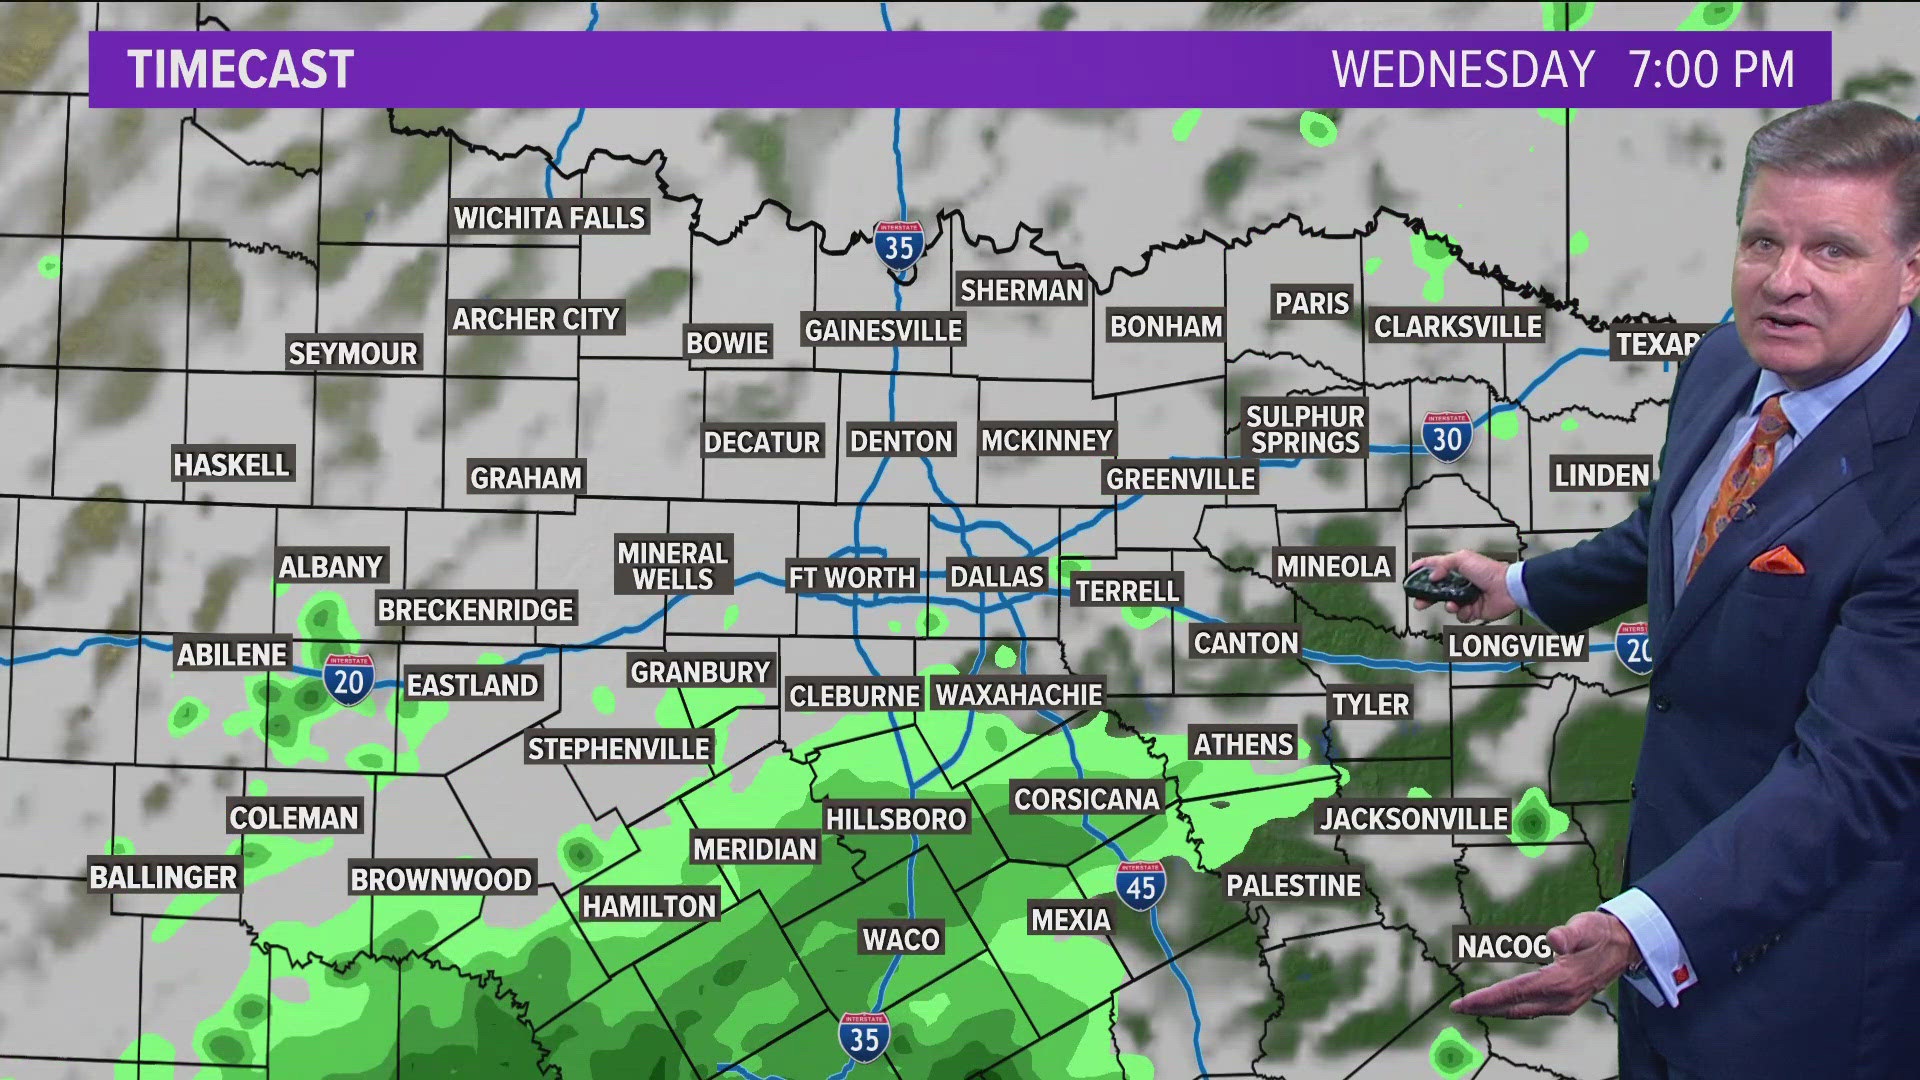 For North Texas, our chances for rain will come mainly in the form of scattered showers or storms